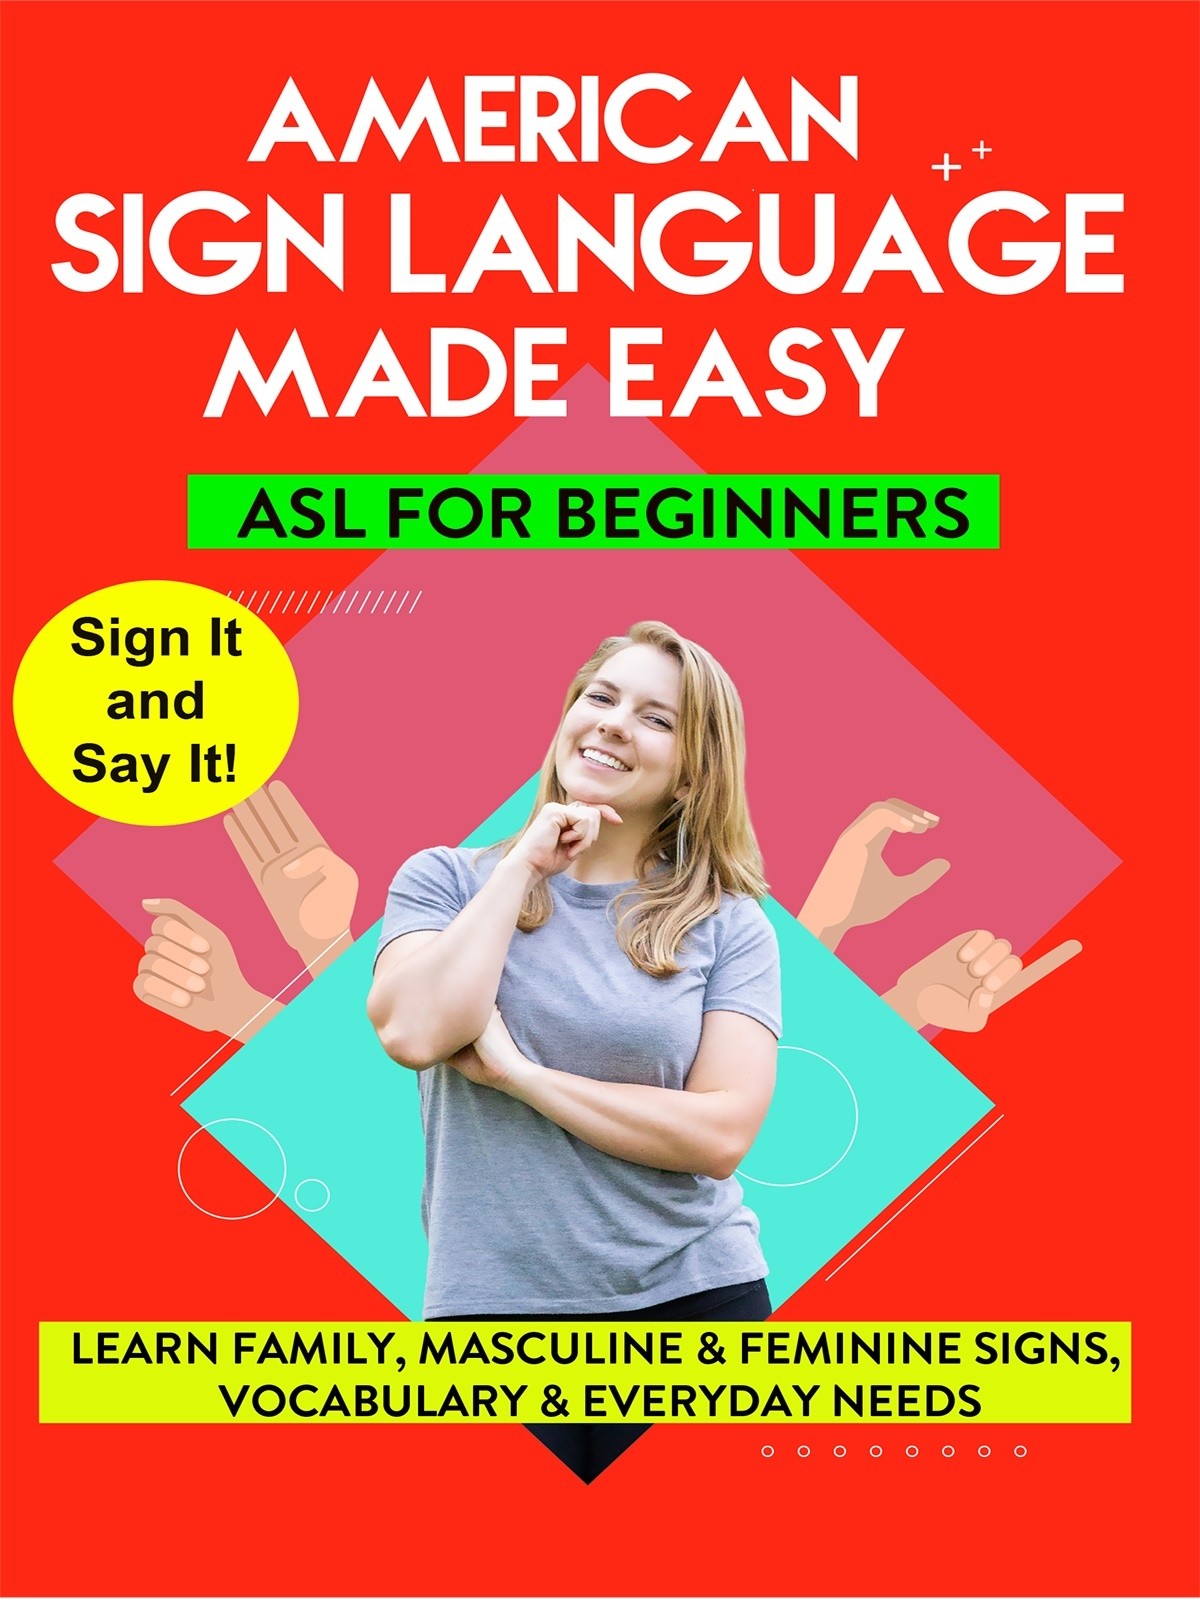 American Sign Language Made Easy - ASL for Beginners  - Family, Masculine and Feminine Signs, Vocabulary, and Everyday Needs